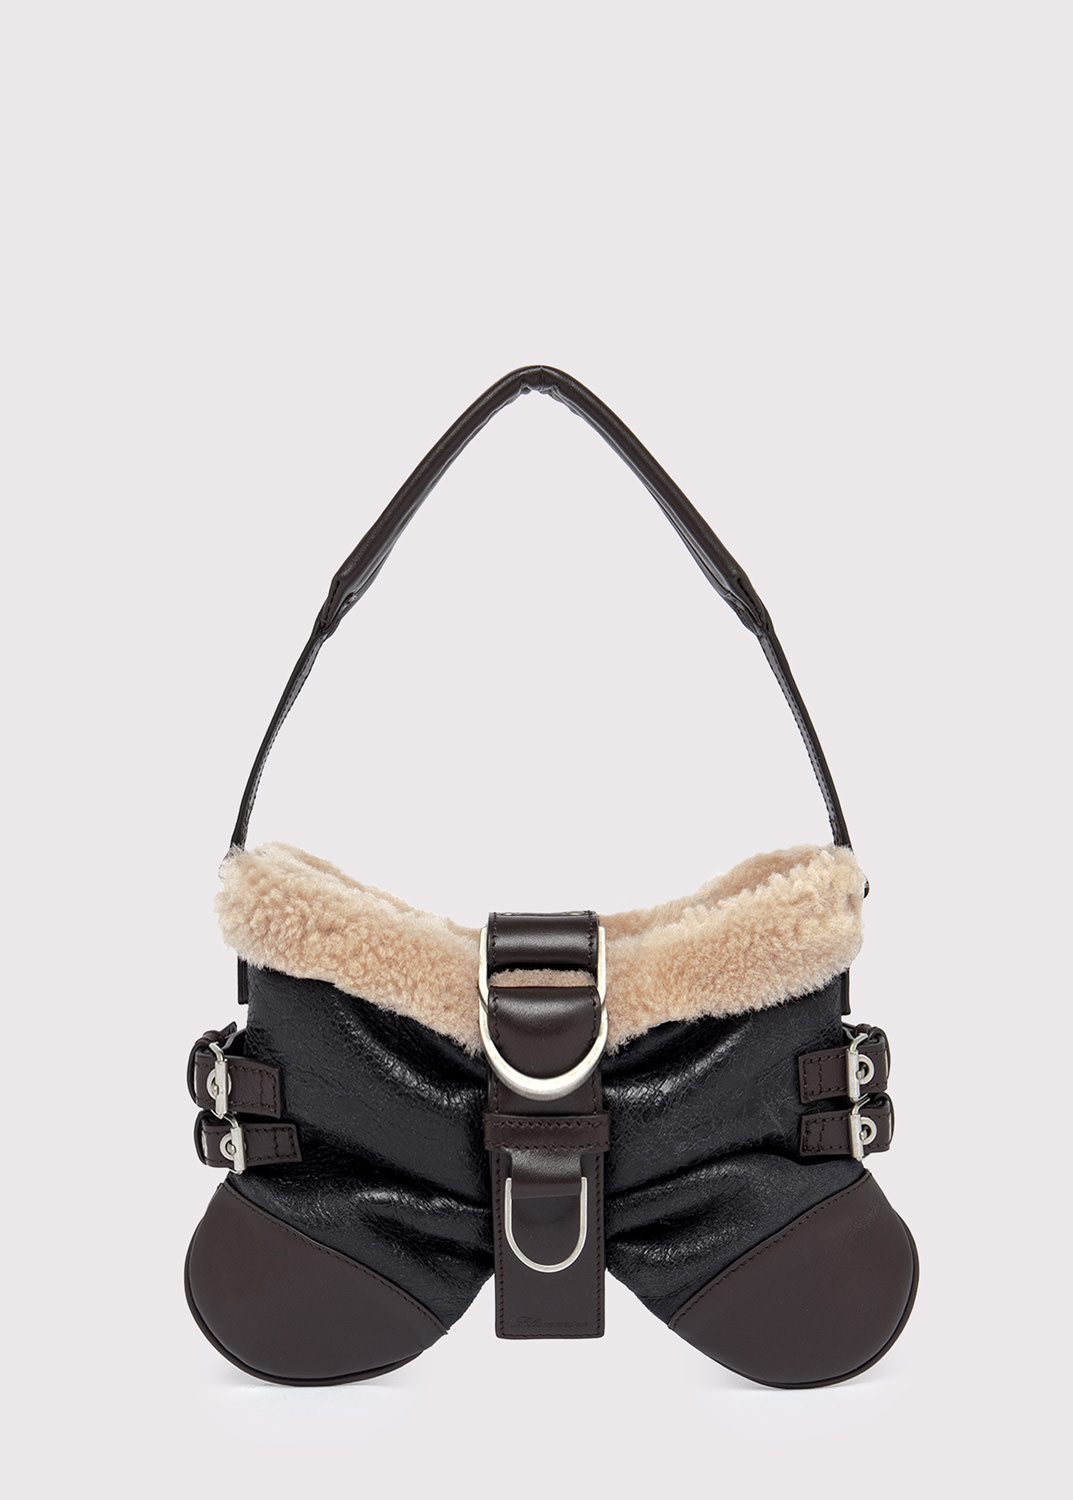 BLUMARINE: SMALL-SIZE BUTTERFLY BAG IN SHEARLING